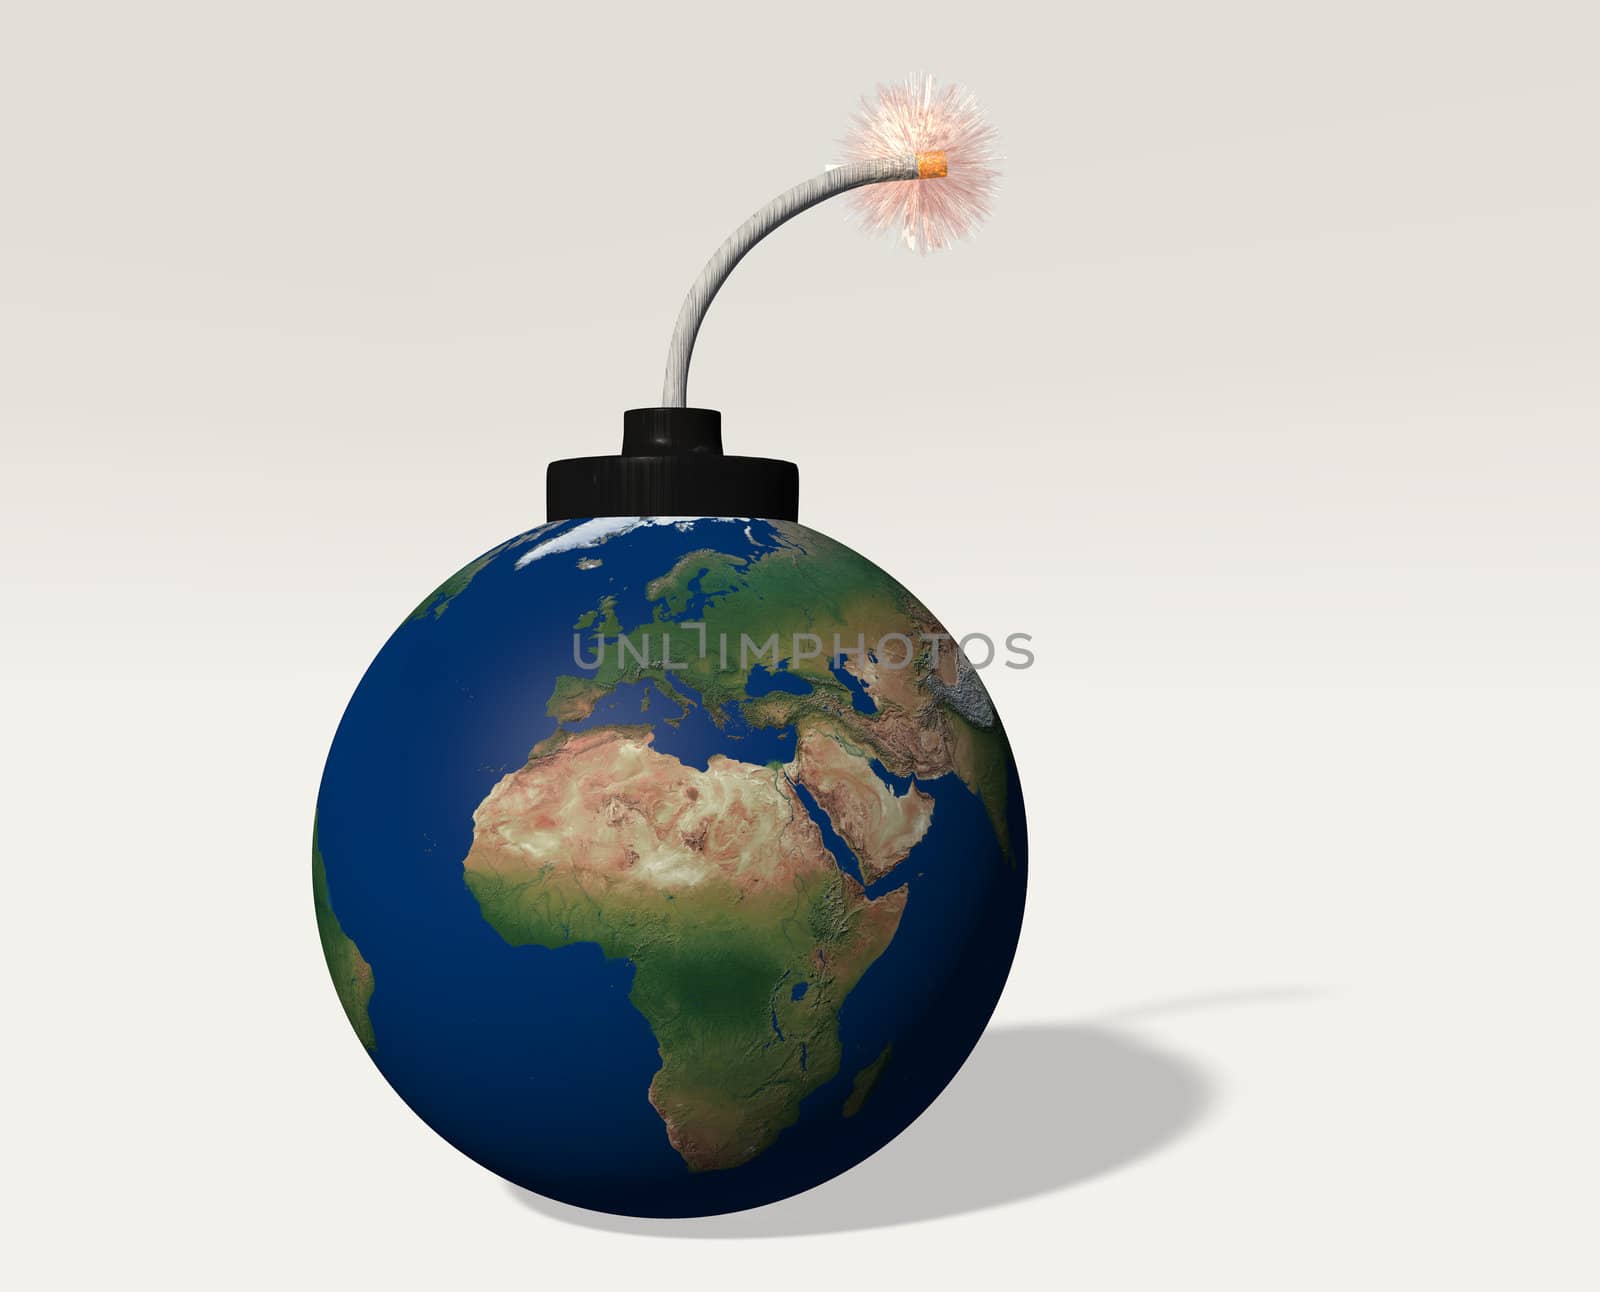 The world  is represented as a bomb with a lit fuse and has in foreground europe and africa